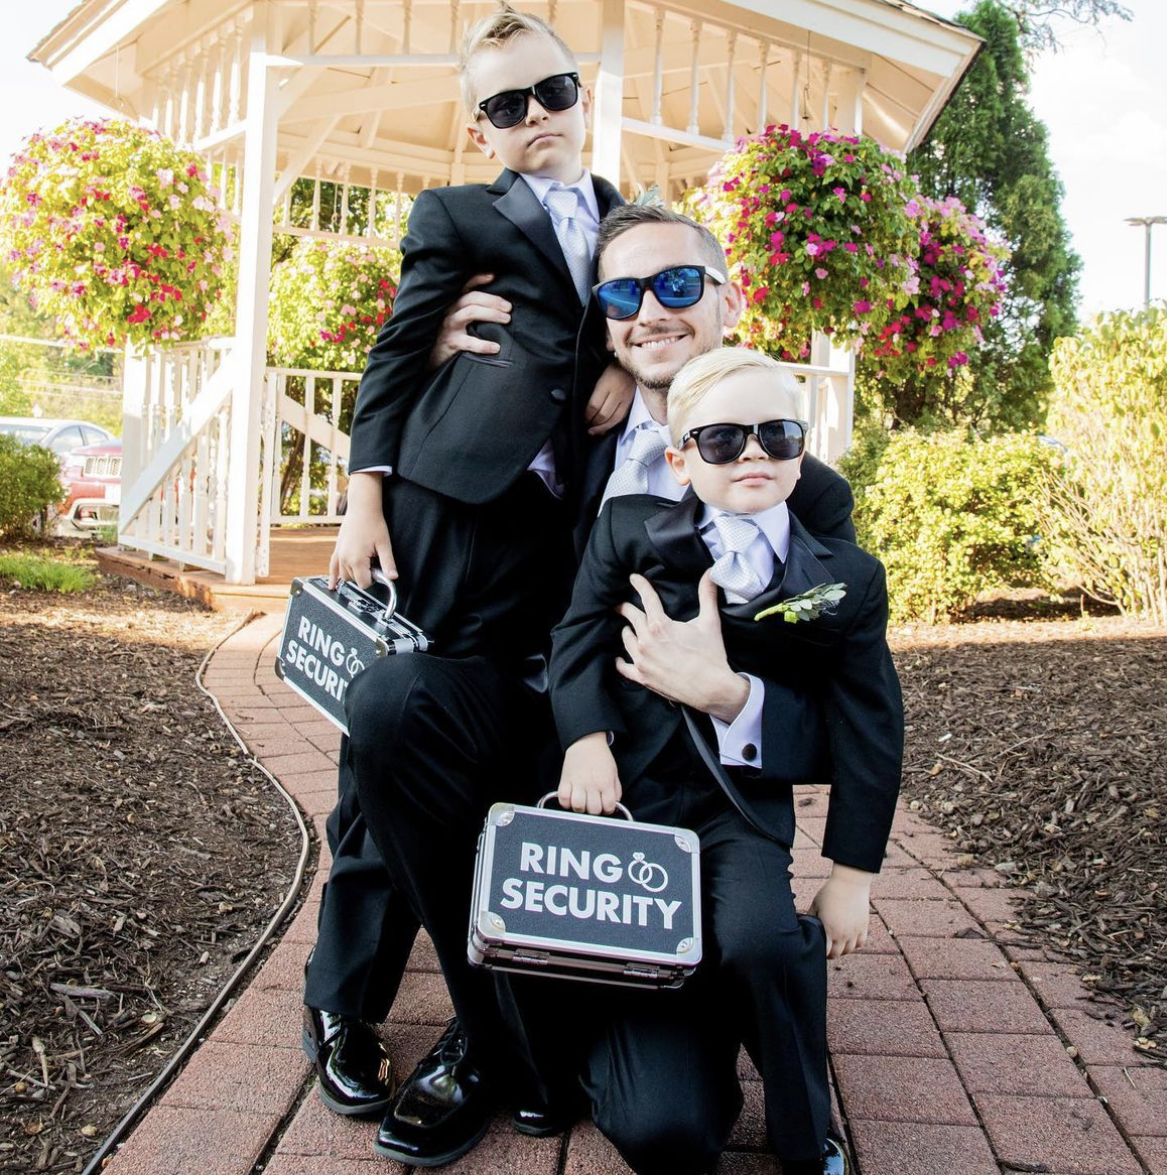 THE RING LEGEND Security Package for Ring Bearer